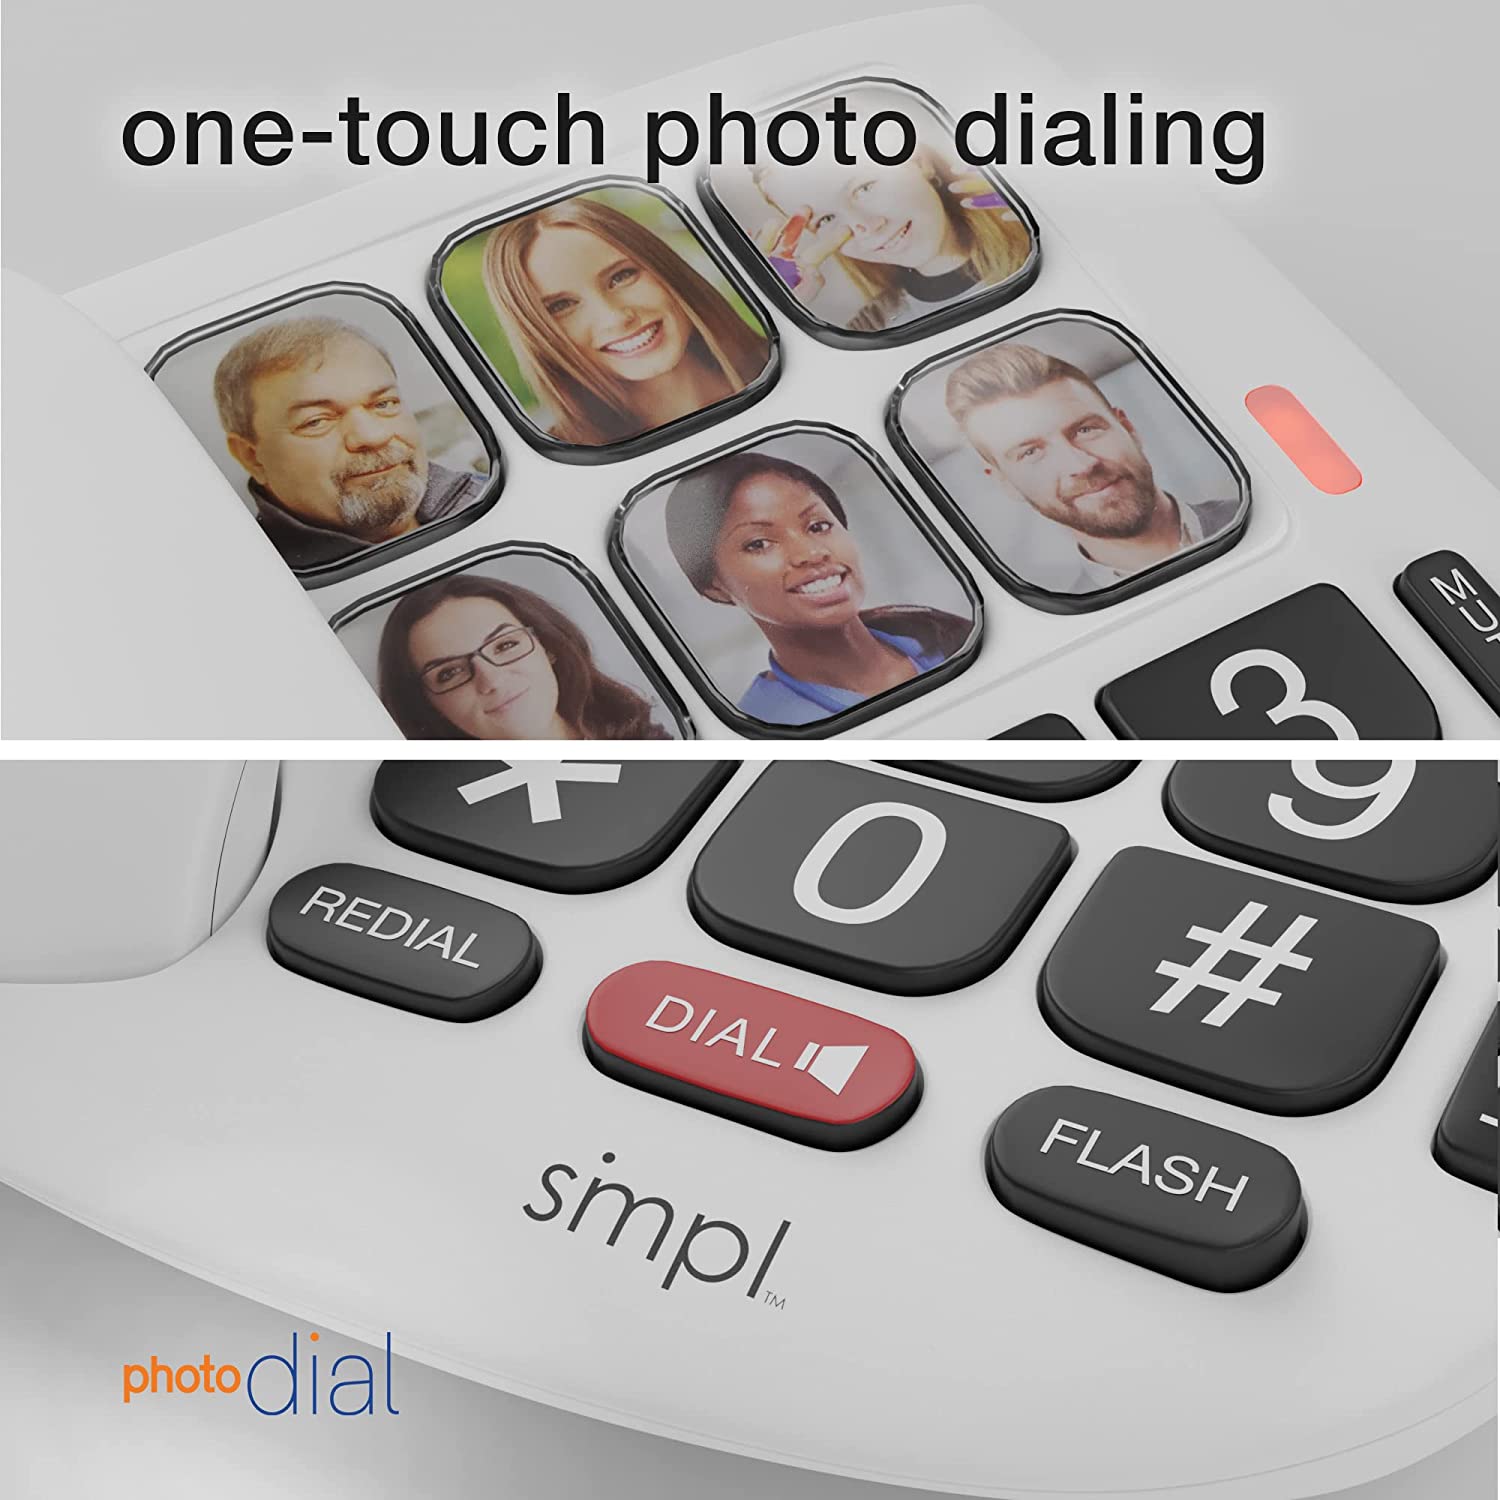 SMPL Photo Dial Phone - 6 One-Touch Photo Memory Buttons - Senior.com Corded Phones